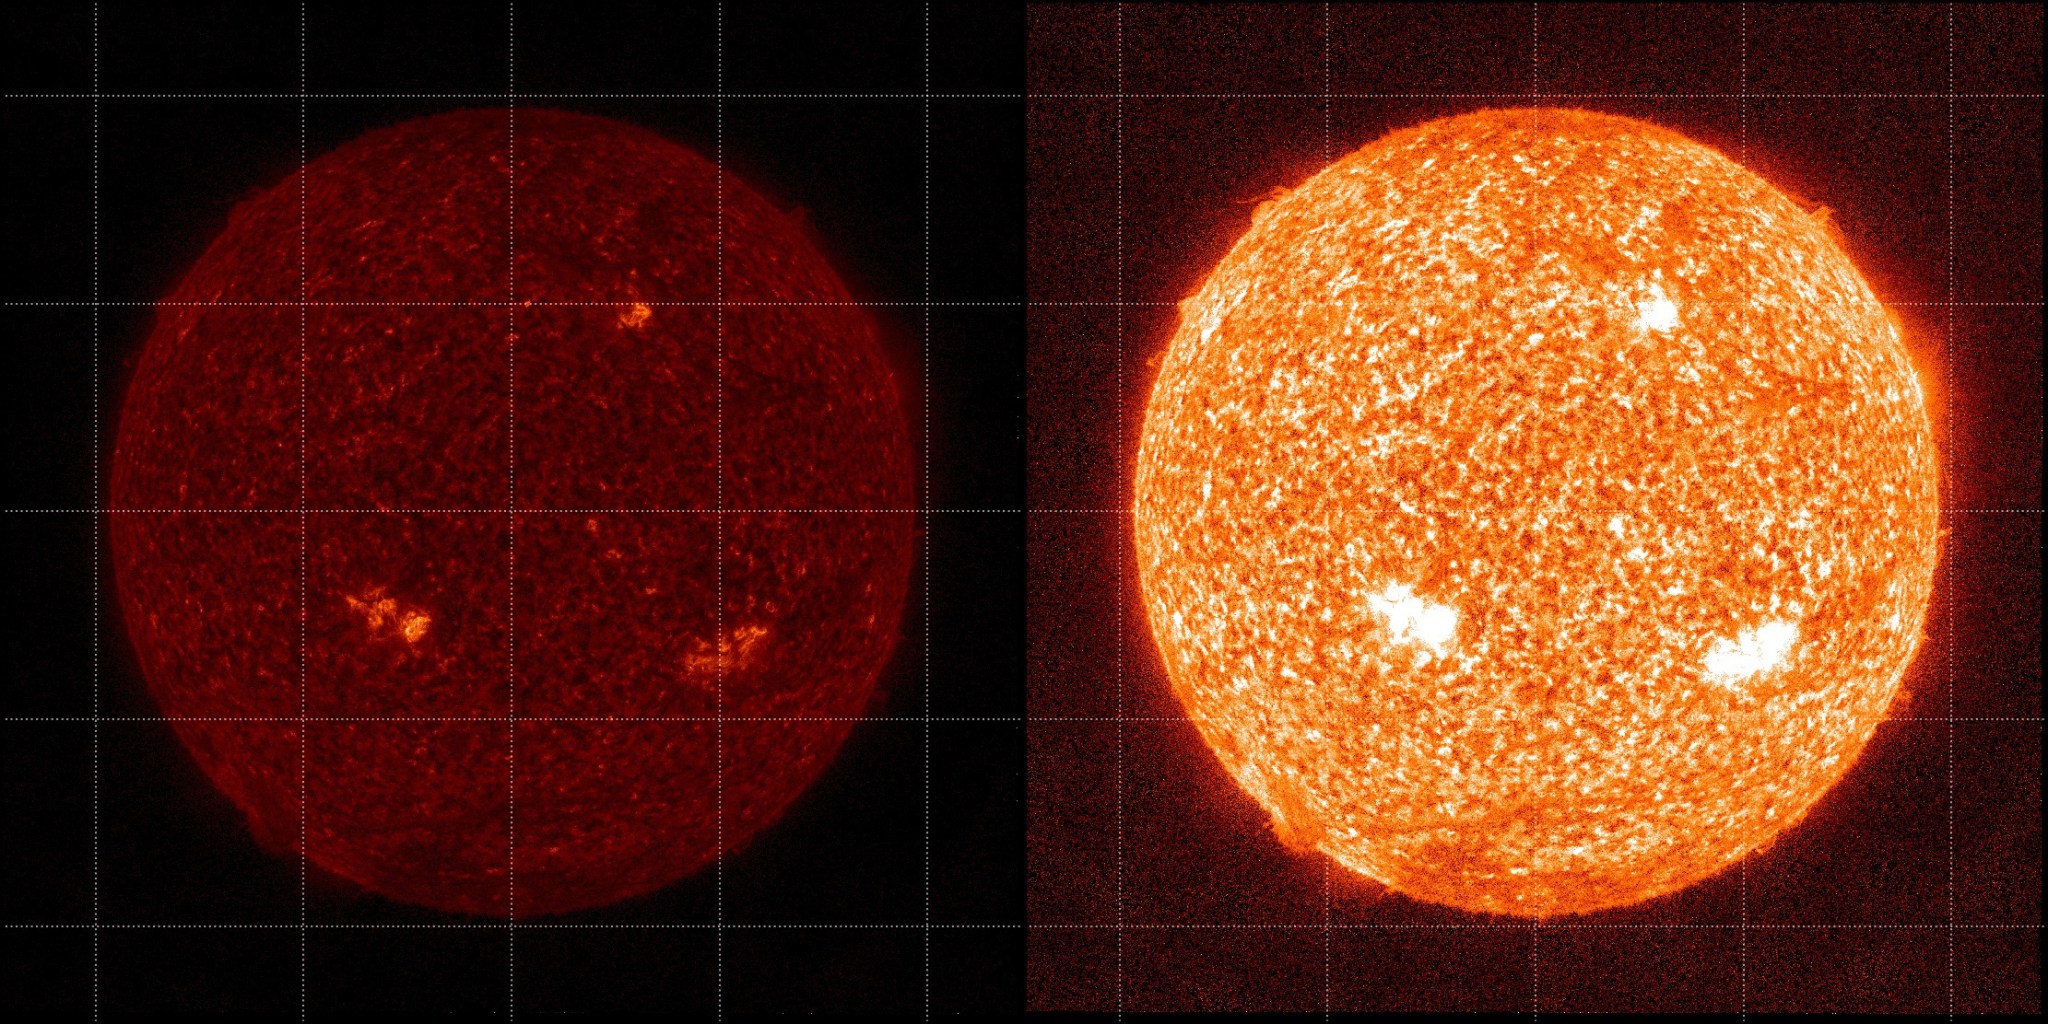 Side-by-side images of the Sun showing effects of instrument degradation on image quality. The image on the left is shows a dark red orb, the Sun as visualized with an uncalibrated instrument. The image on the right shows a bright orange orb.